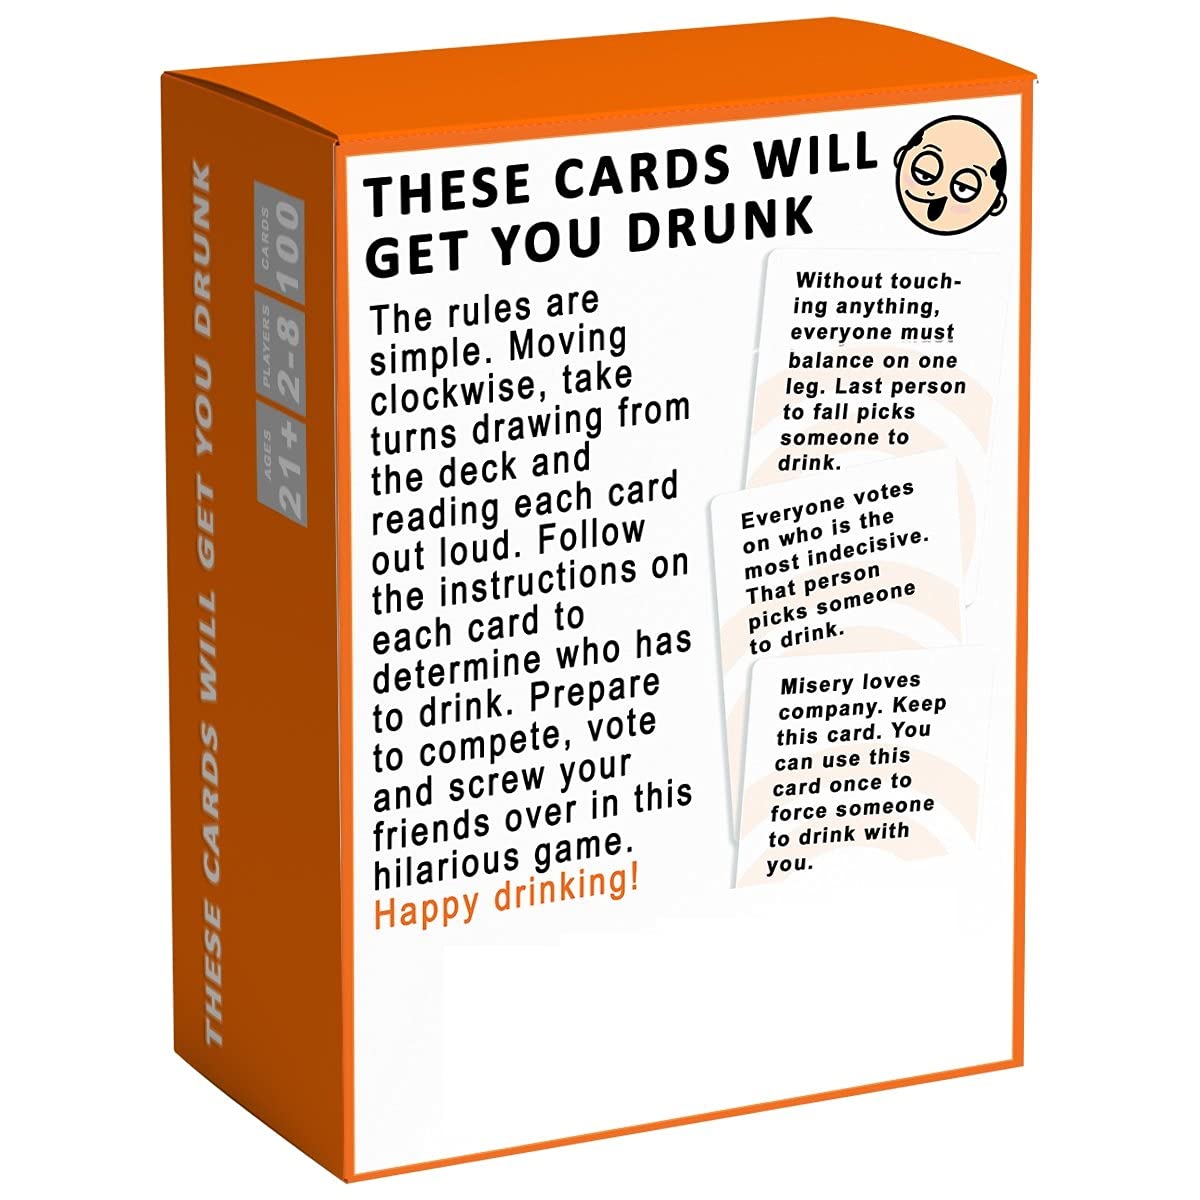 KIDS MANDI logo on "These Cards Will Get You Drunk" game.